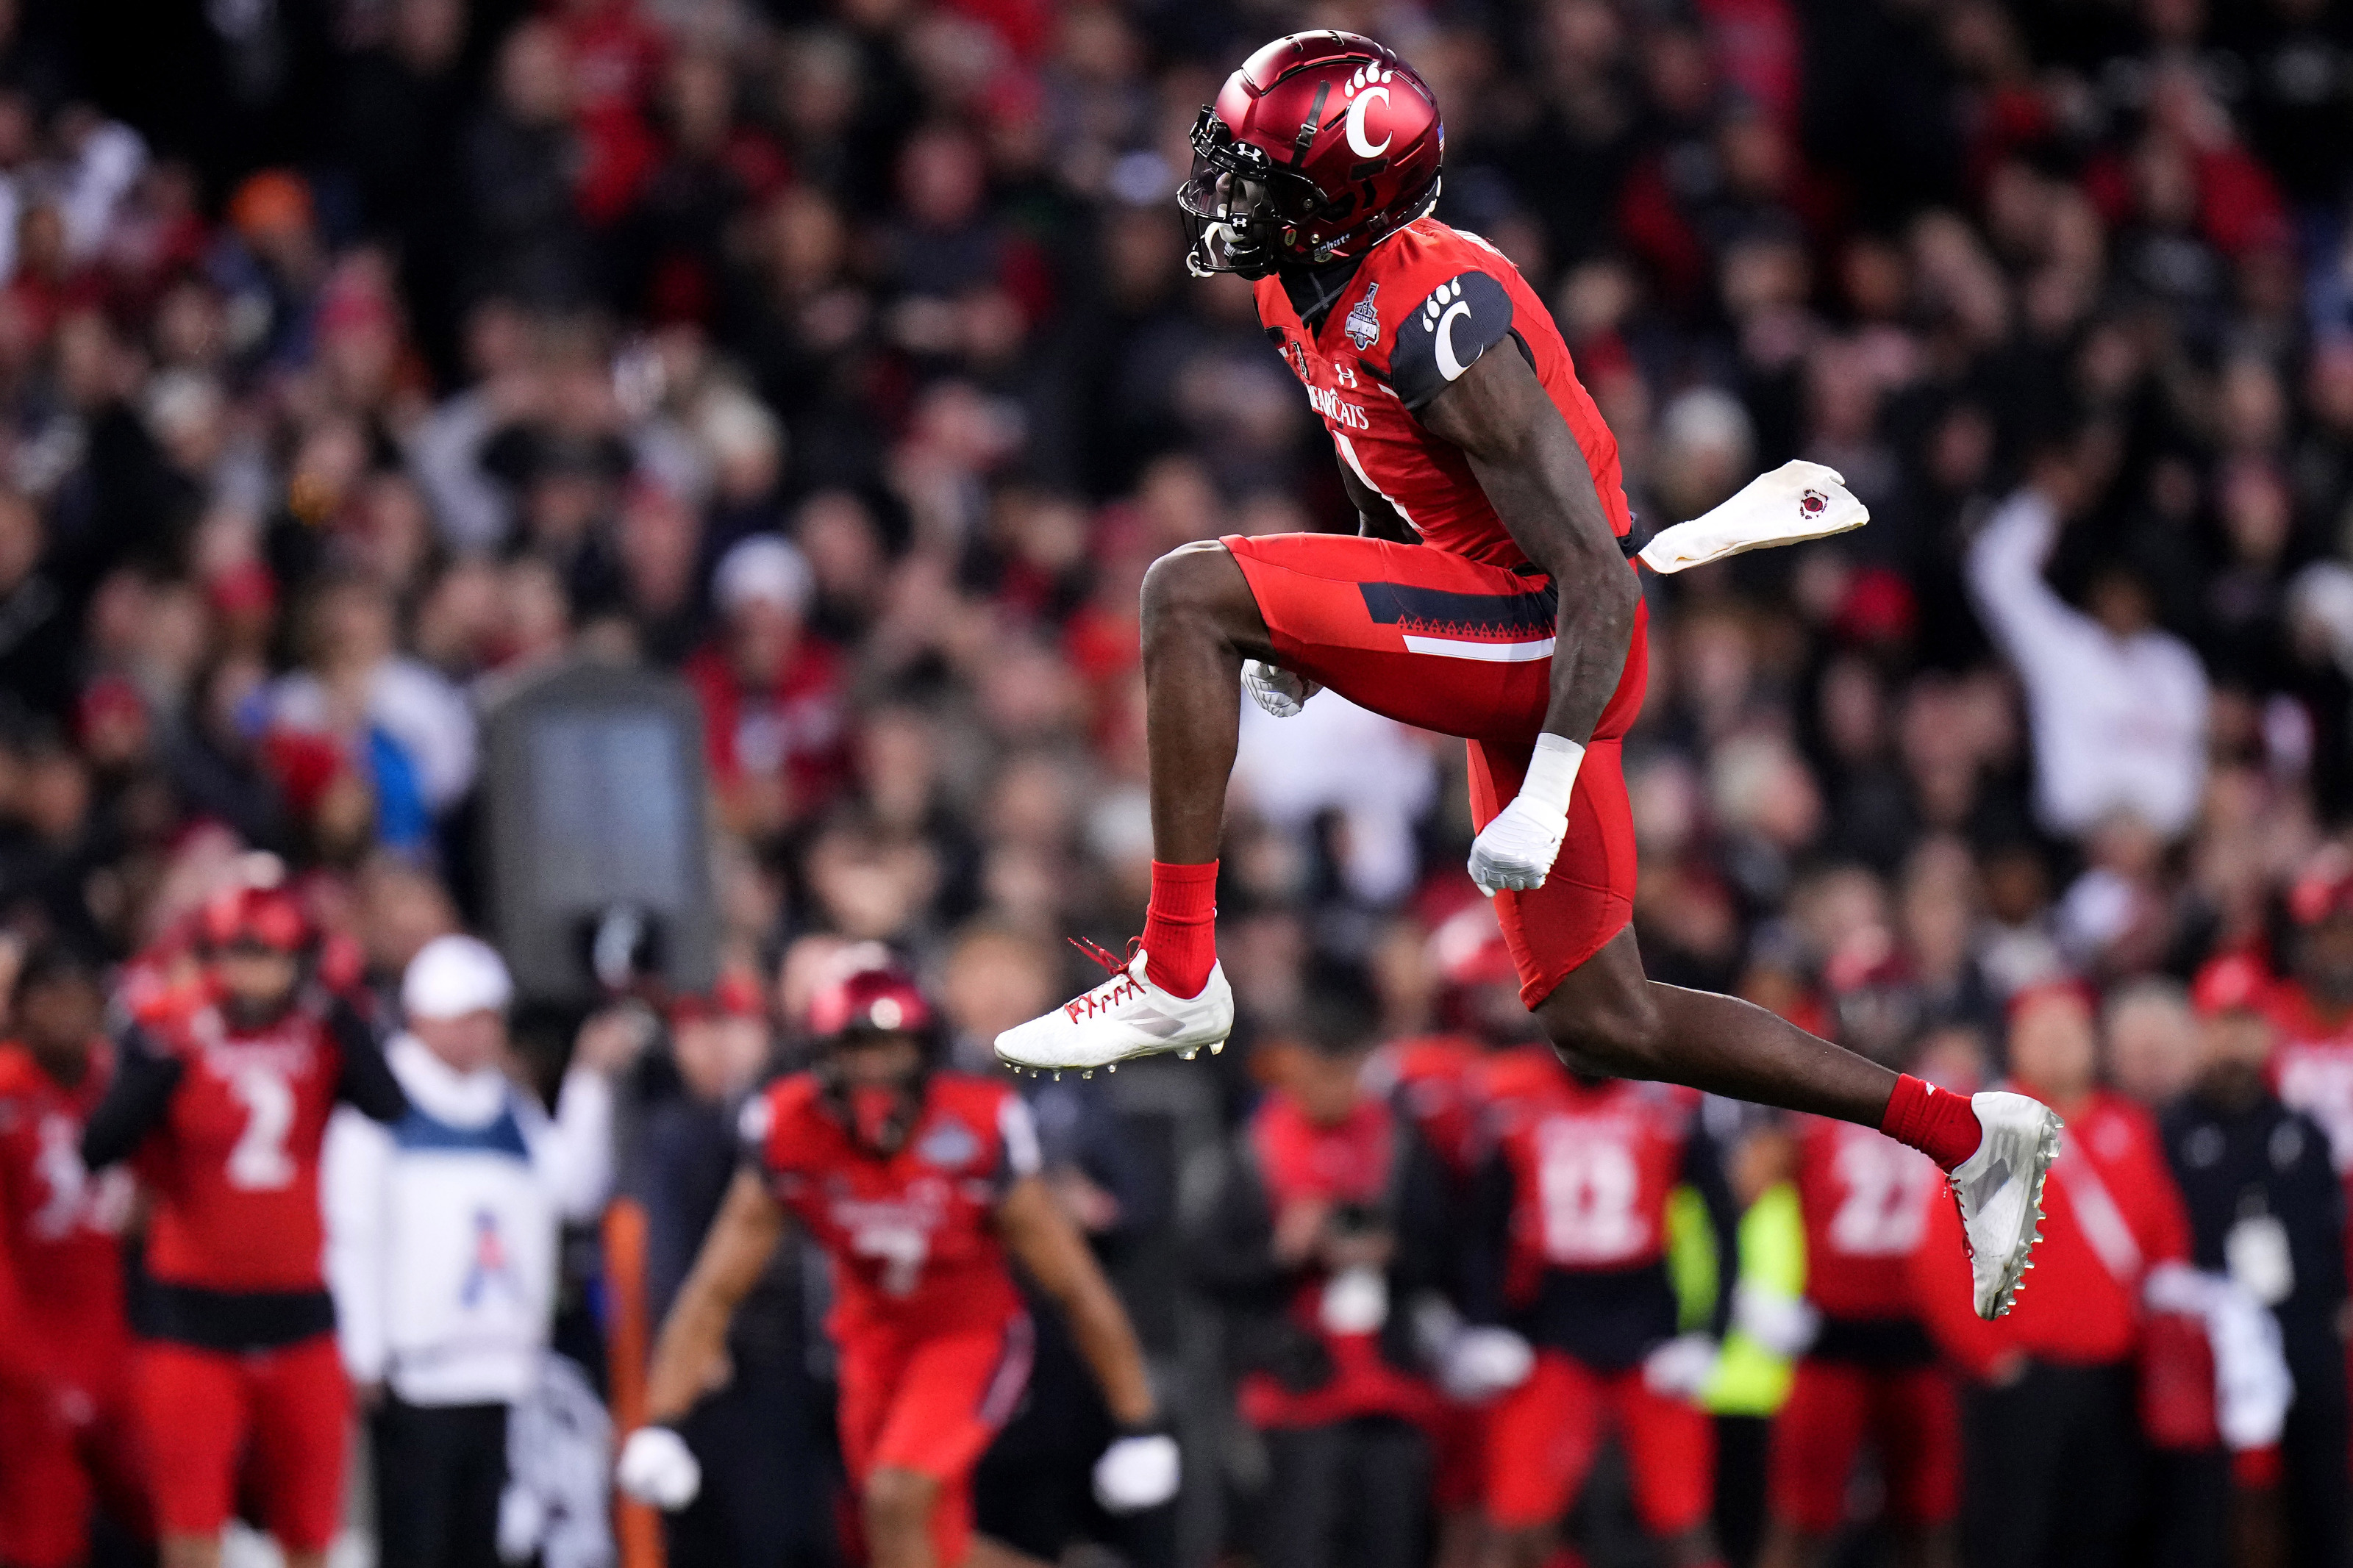 2022 NFL Draft Notebook: Best Matchups in this year's Bowl Games